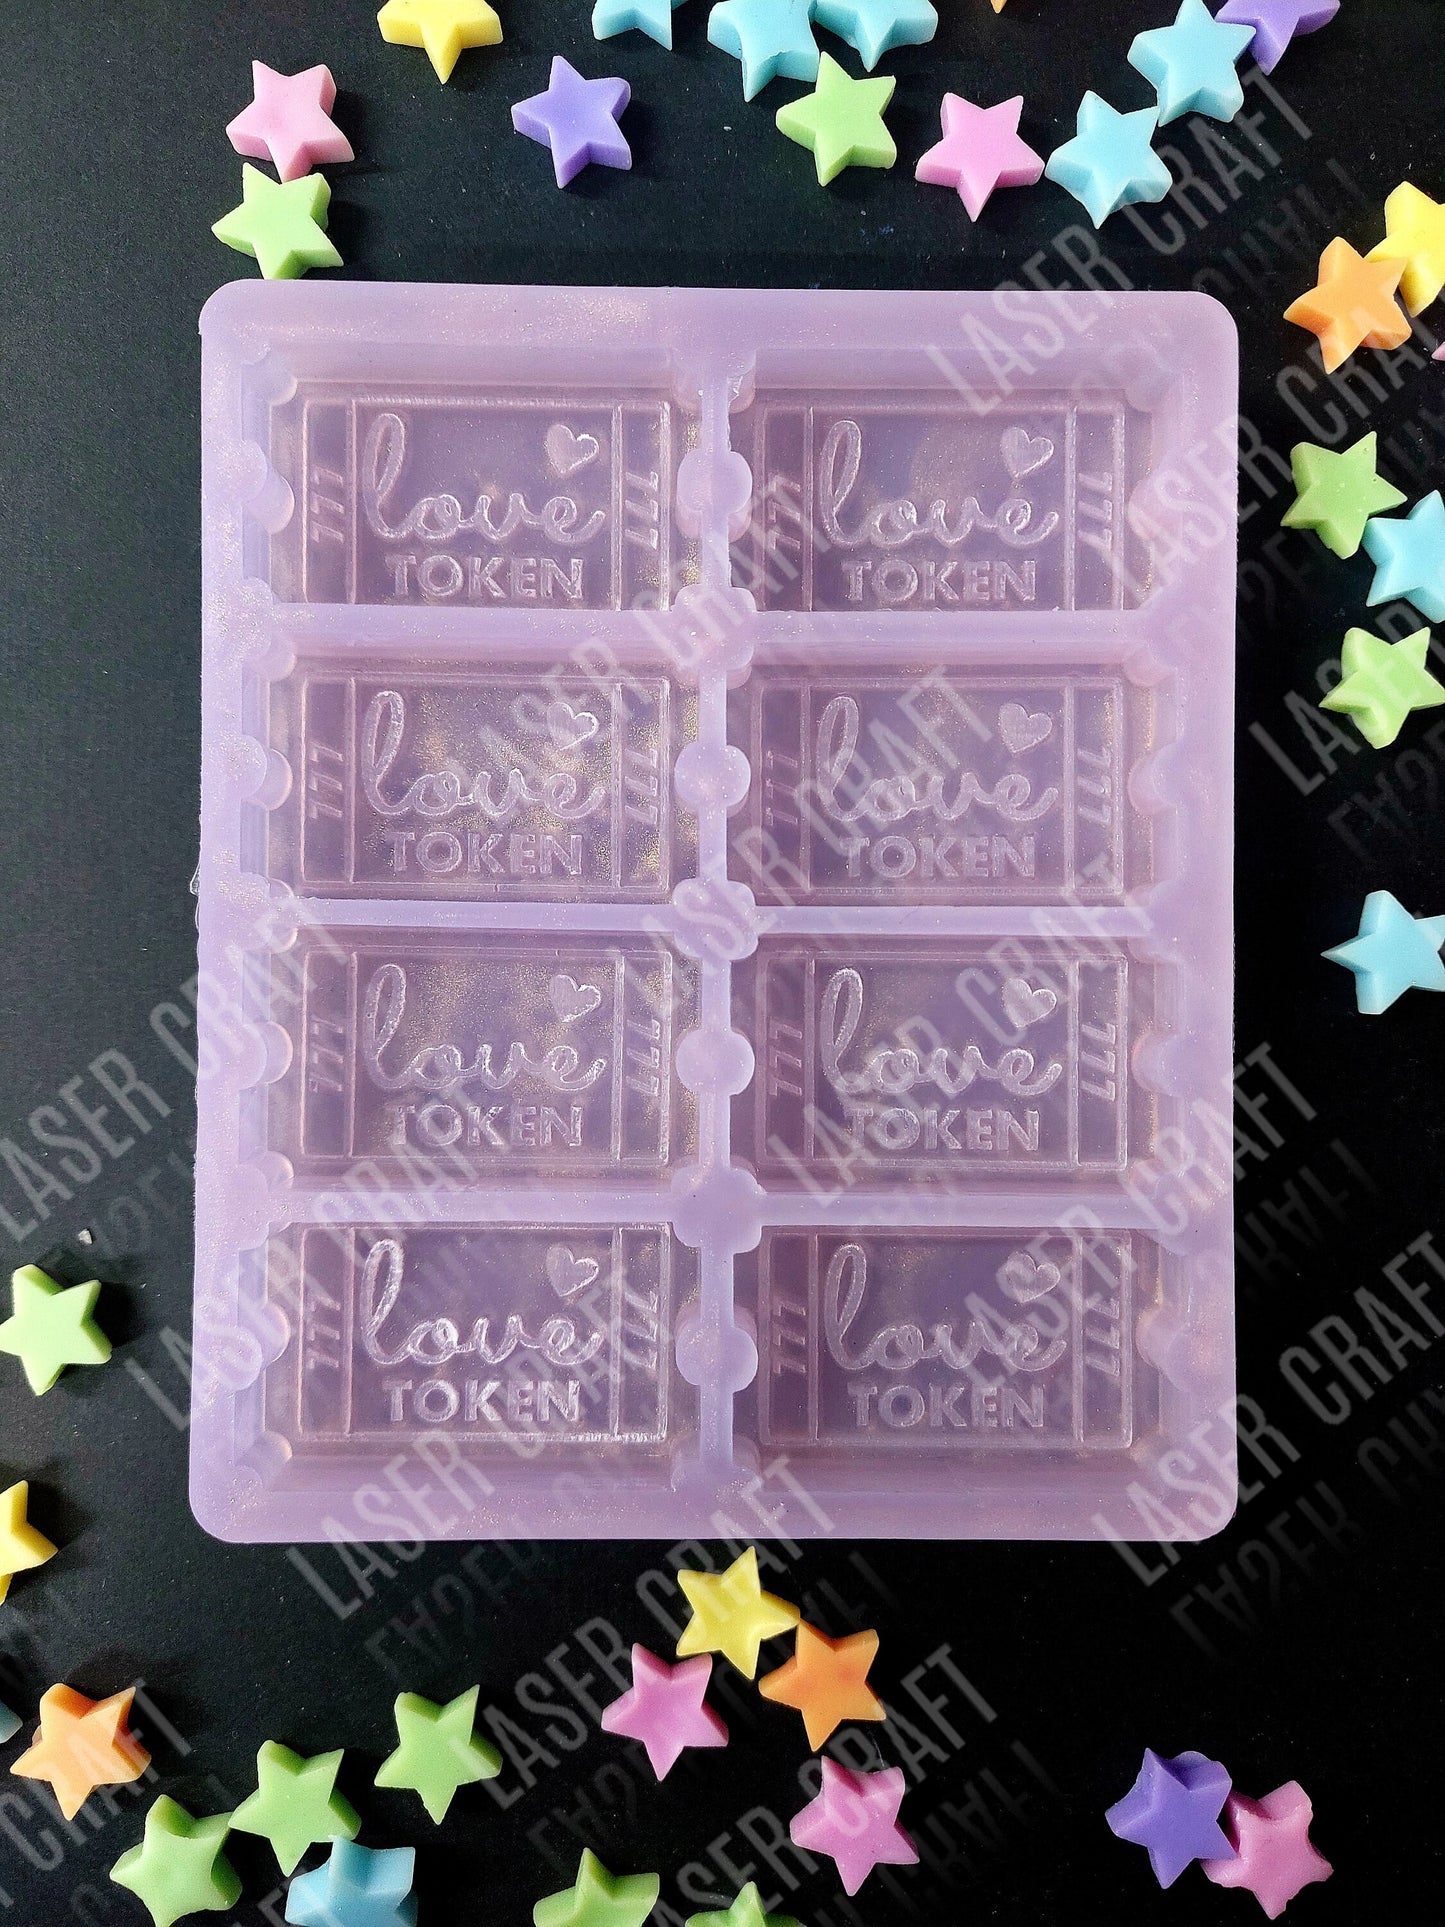 Love Token 8 Cell Silicone Mould for wax resin soap